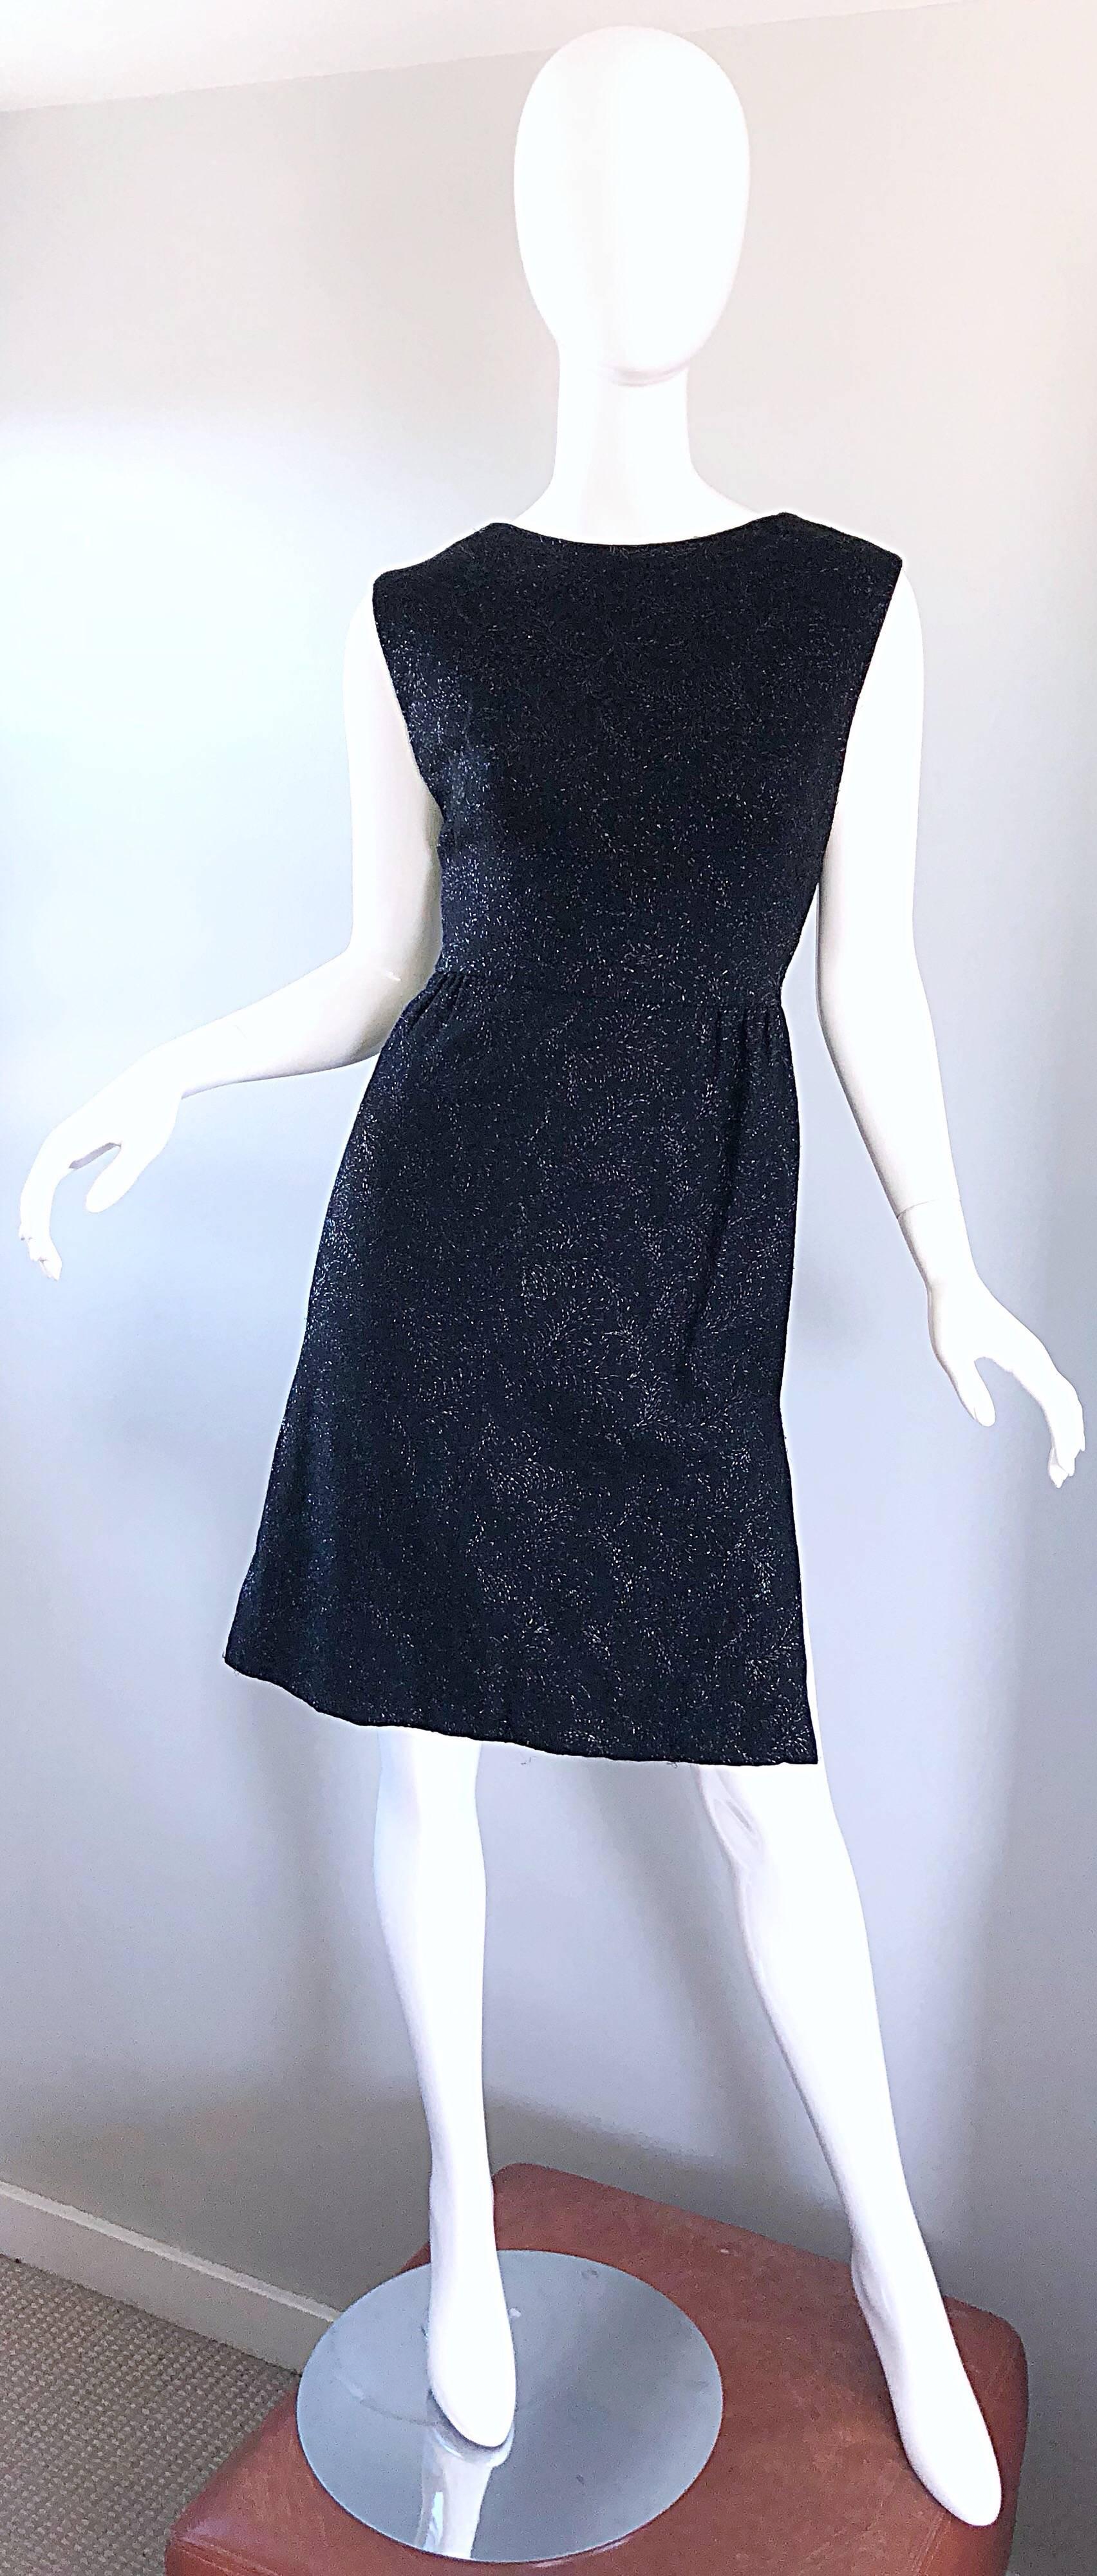 Bombshell HENRY ROSENFELD 1960s little black dress! Not just your average lbd: Features black metallic threading throughout that adds just the right amount of excitement! Fully lined. Full metal zipper up the side with hook-and-eye closure. Perfect